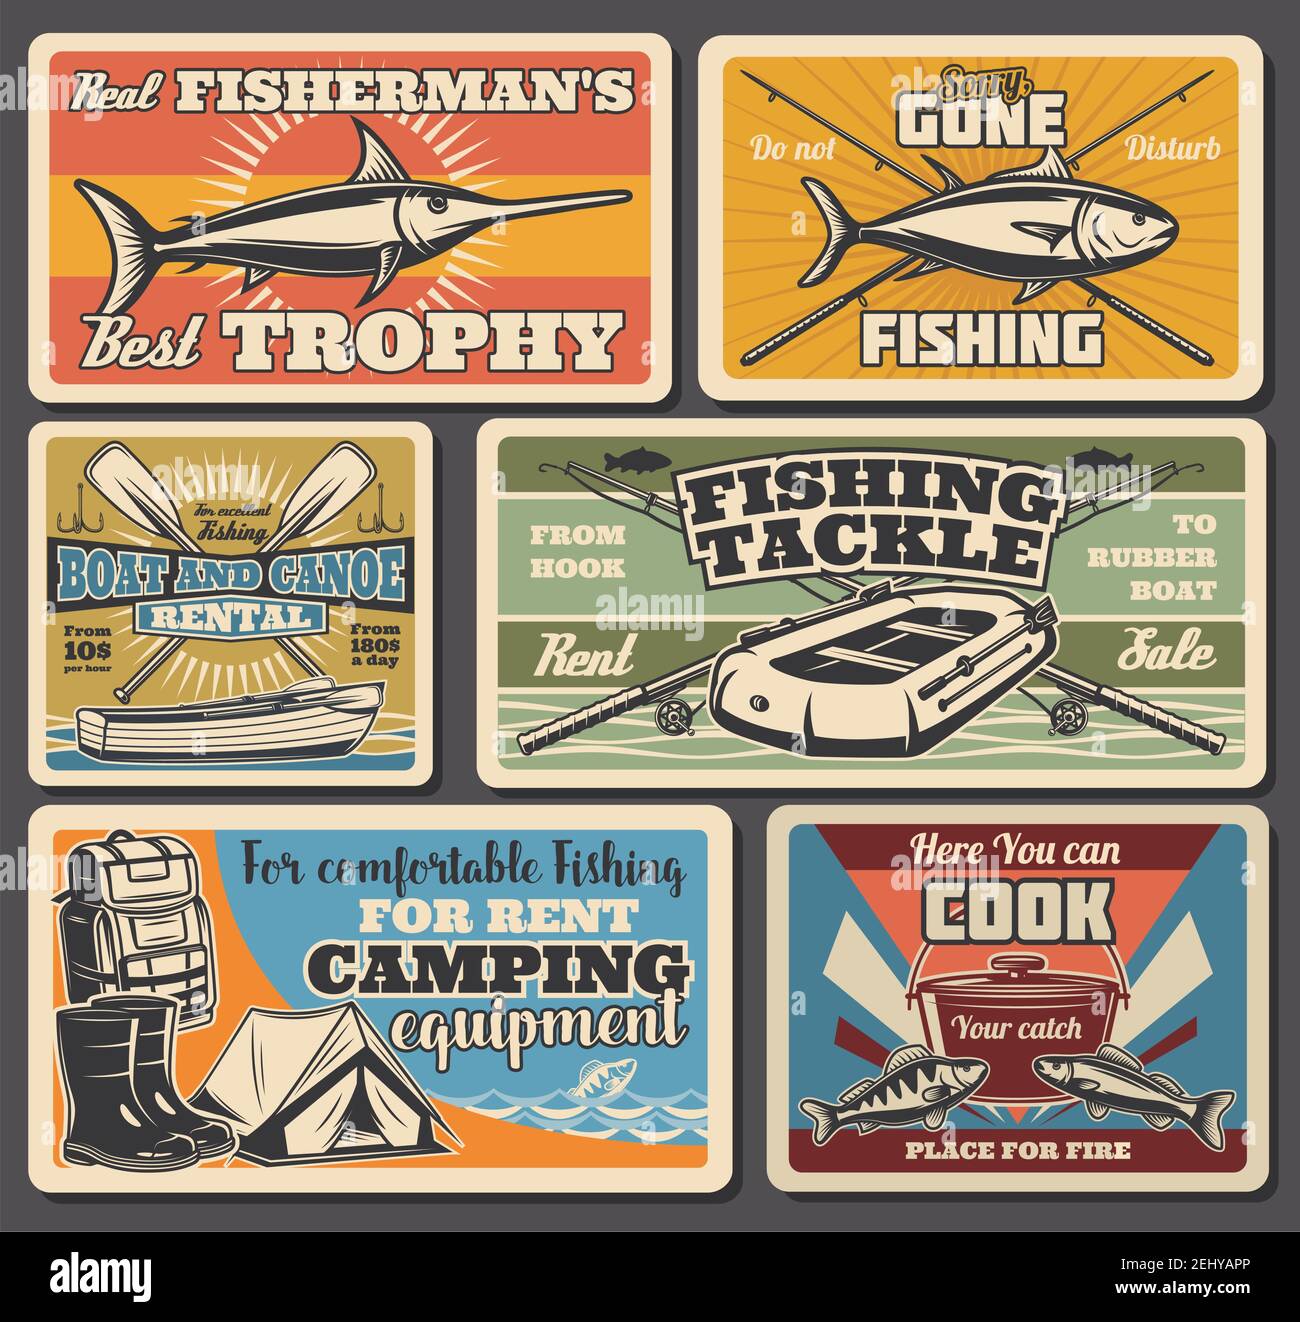 Bait And Tackle Stickers for Sale